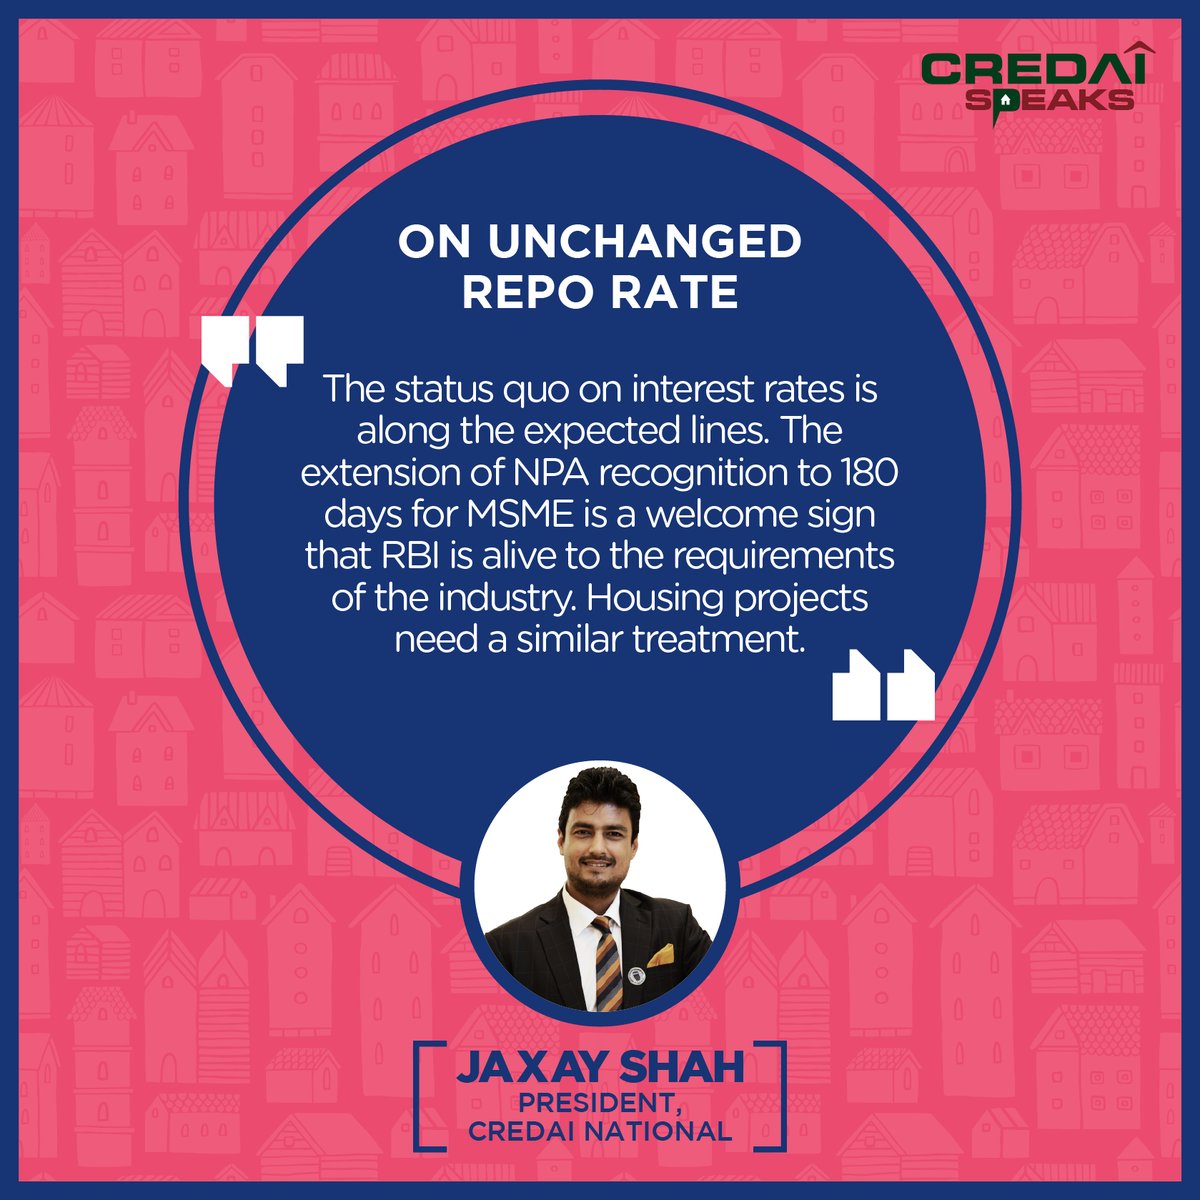 RT @CREDAINational: Here's what our president @jaxayshah has to say about the unchanged repo rate by @RBI. https://t.co/GwPZVLxybJ